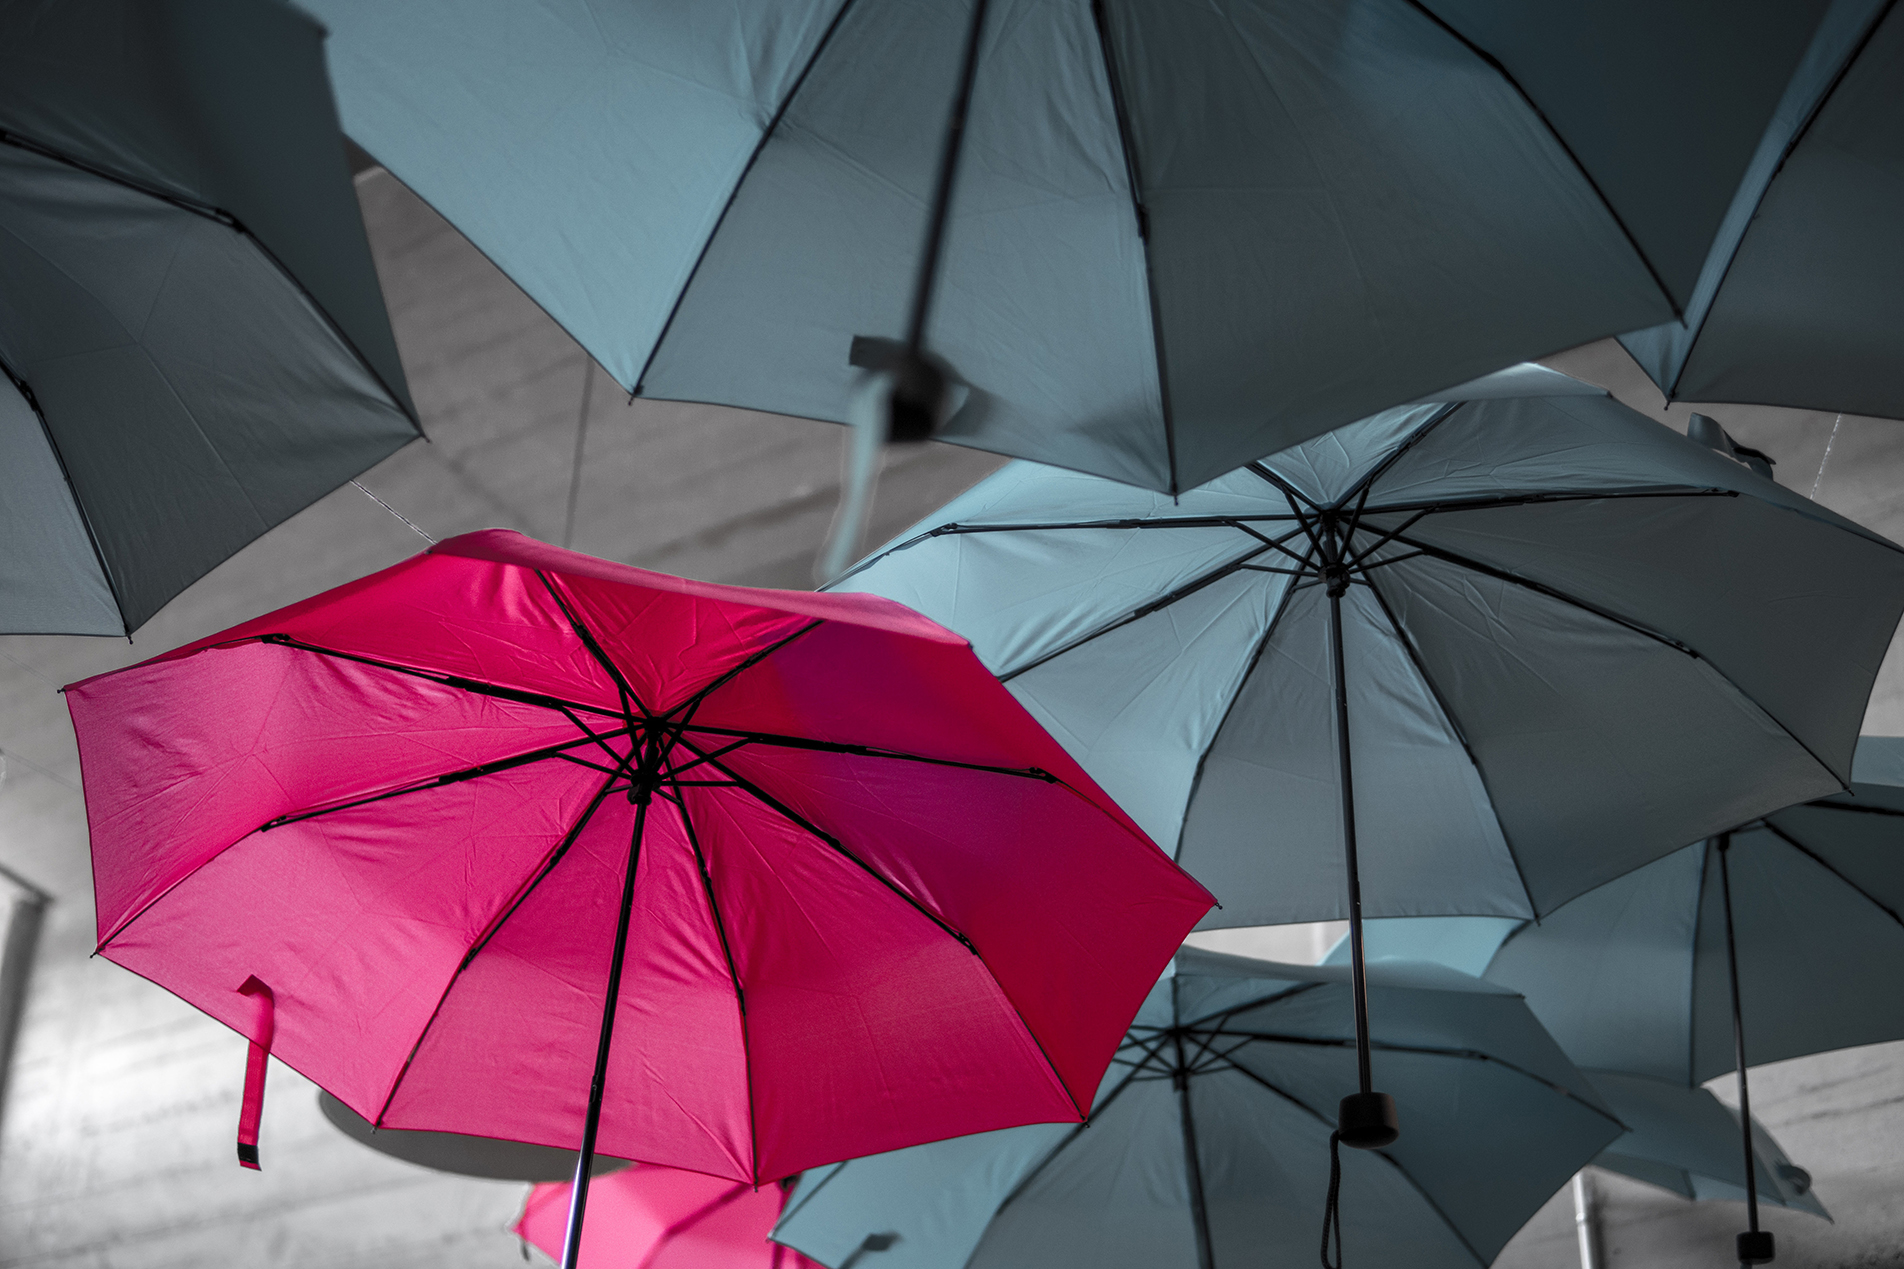 engaging your audience - one red umbrella in the midst of all grey umbrellas - stand out!